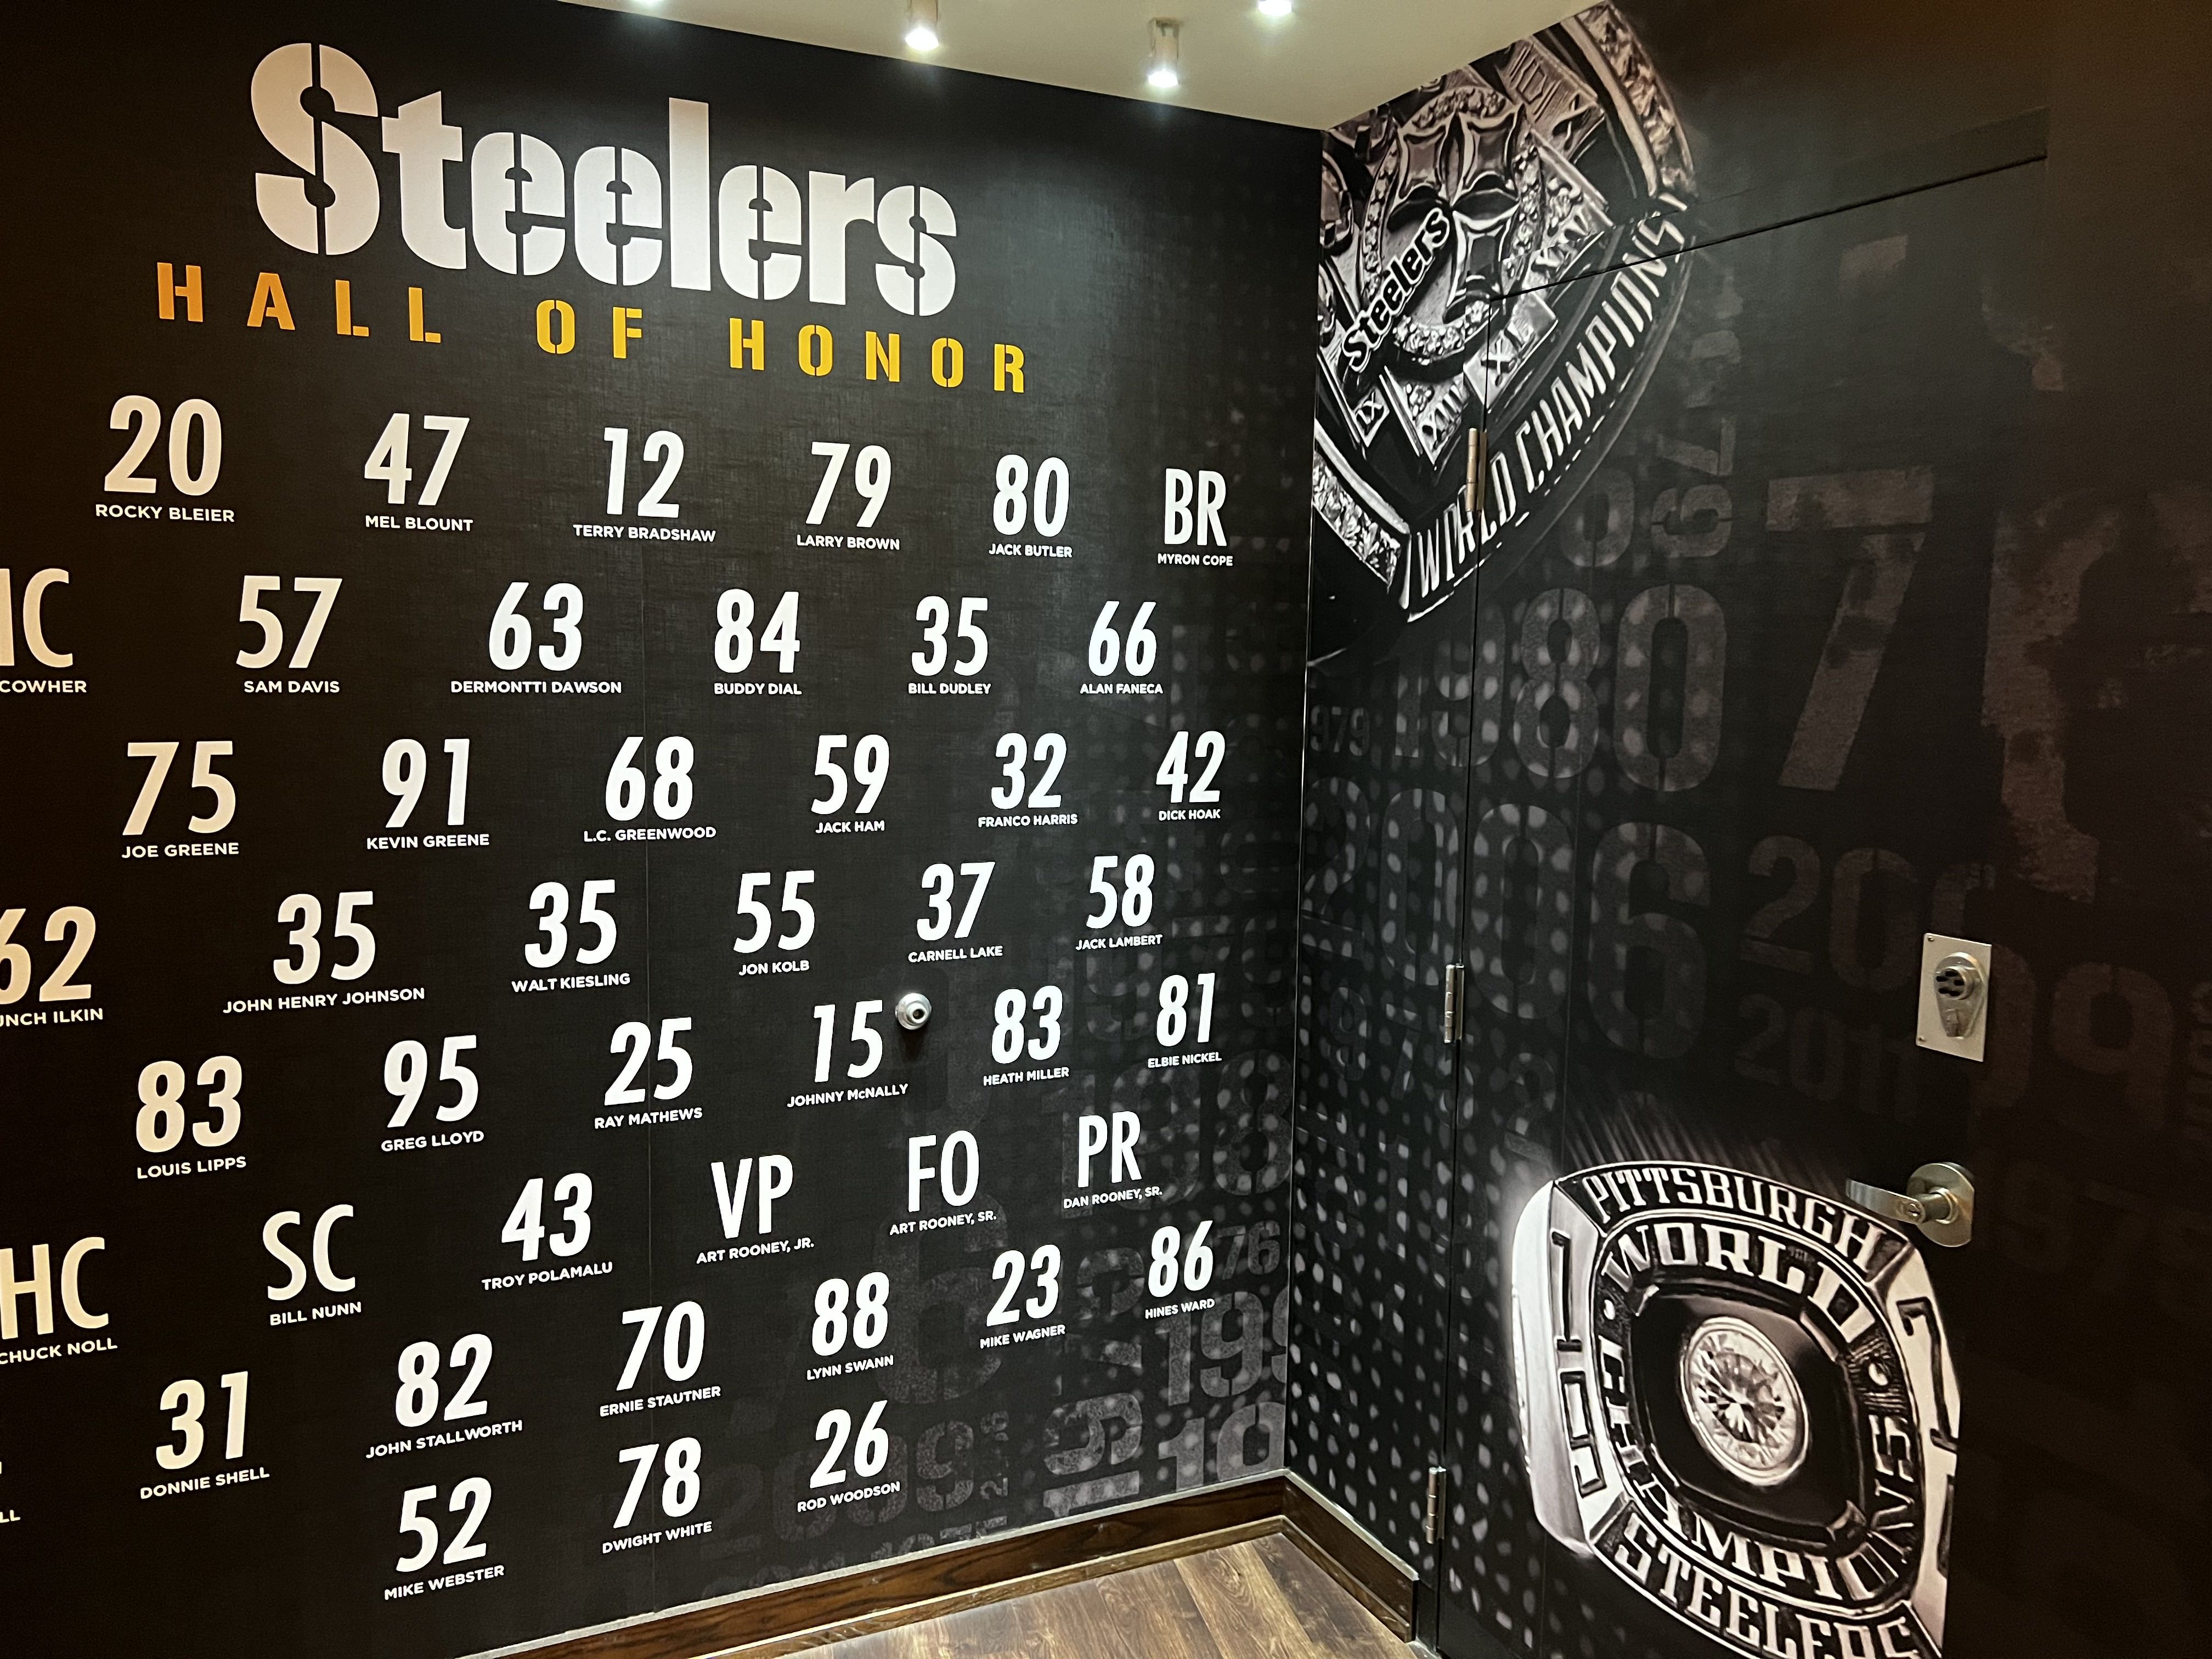 Hall of honor at Steelers exhibit. 